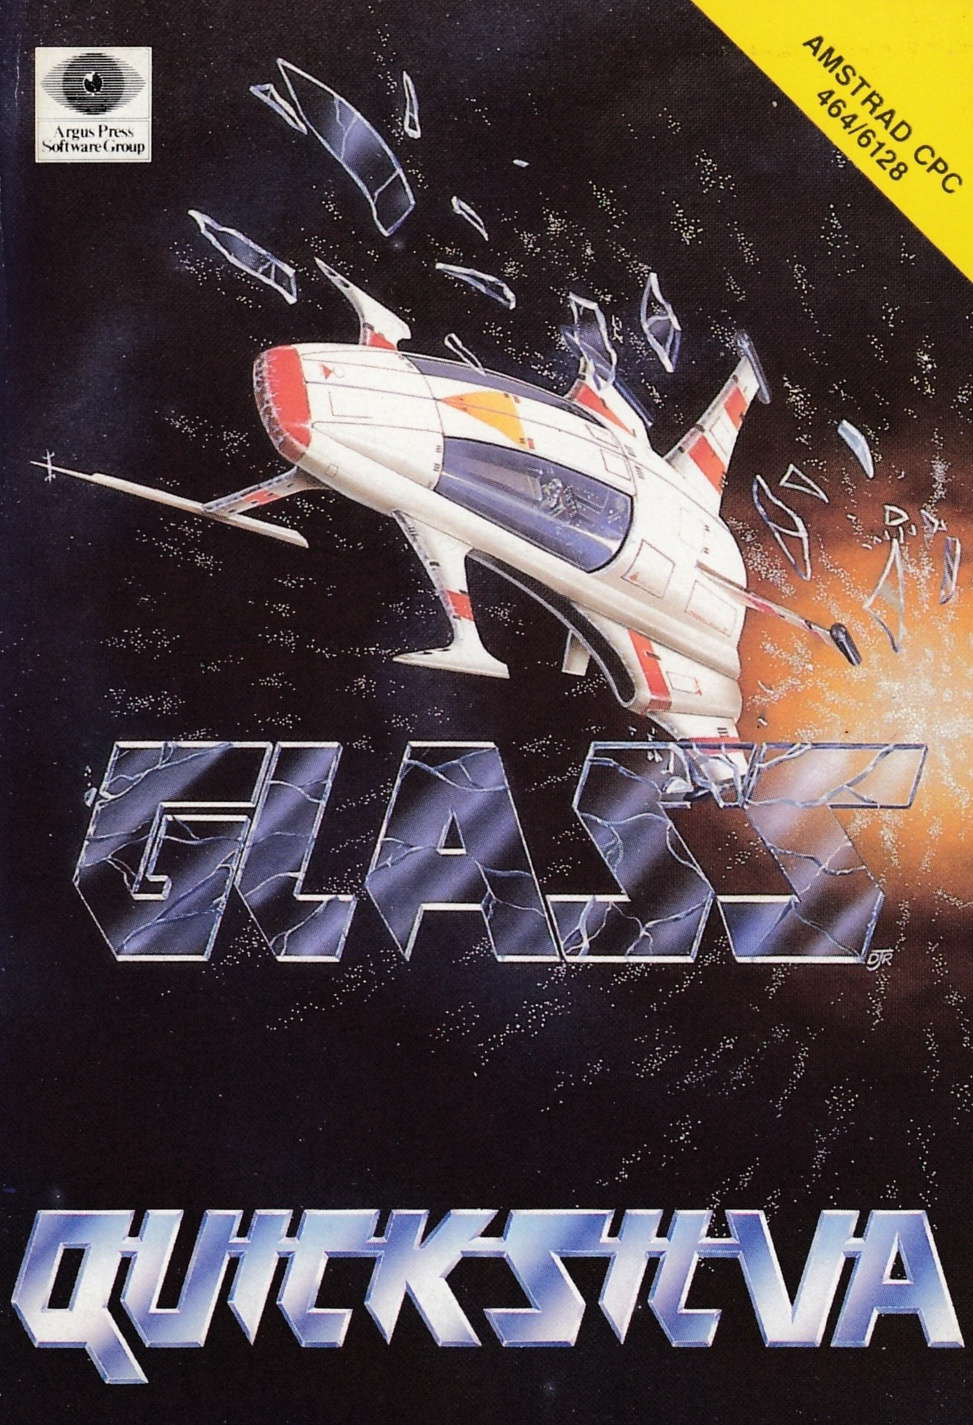 screenshot of the Amstrad CPC game Glass by GameBase CPC